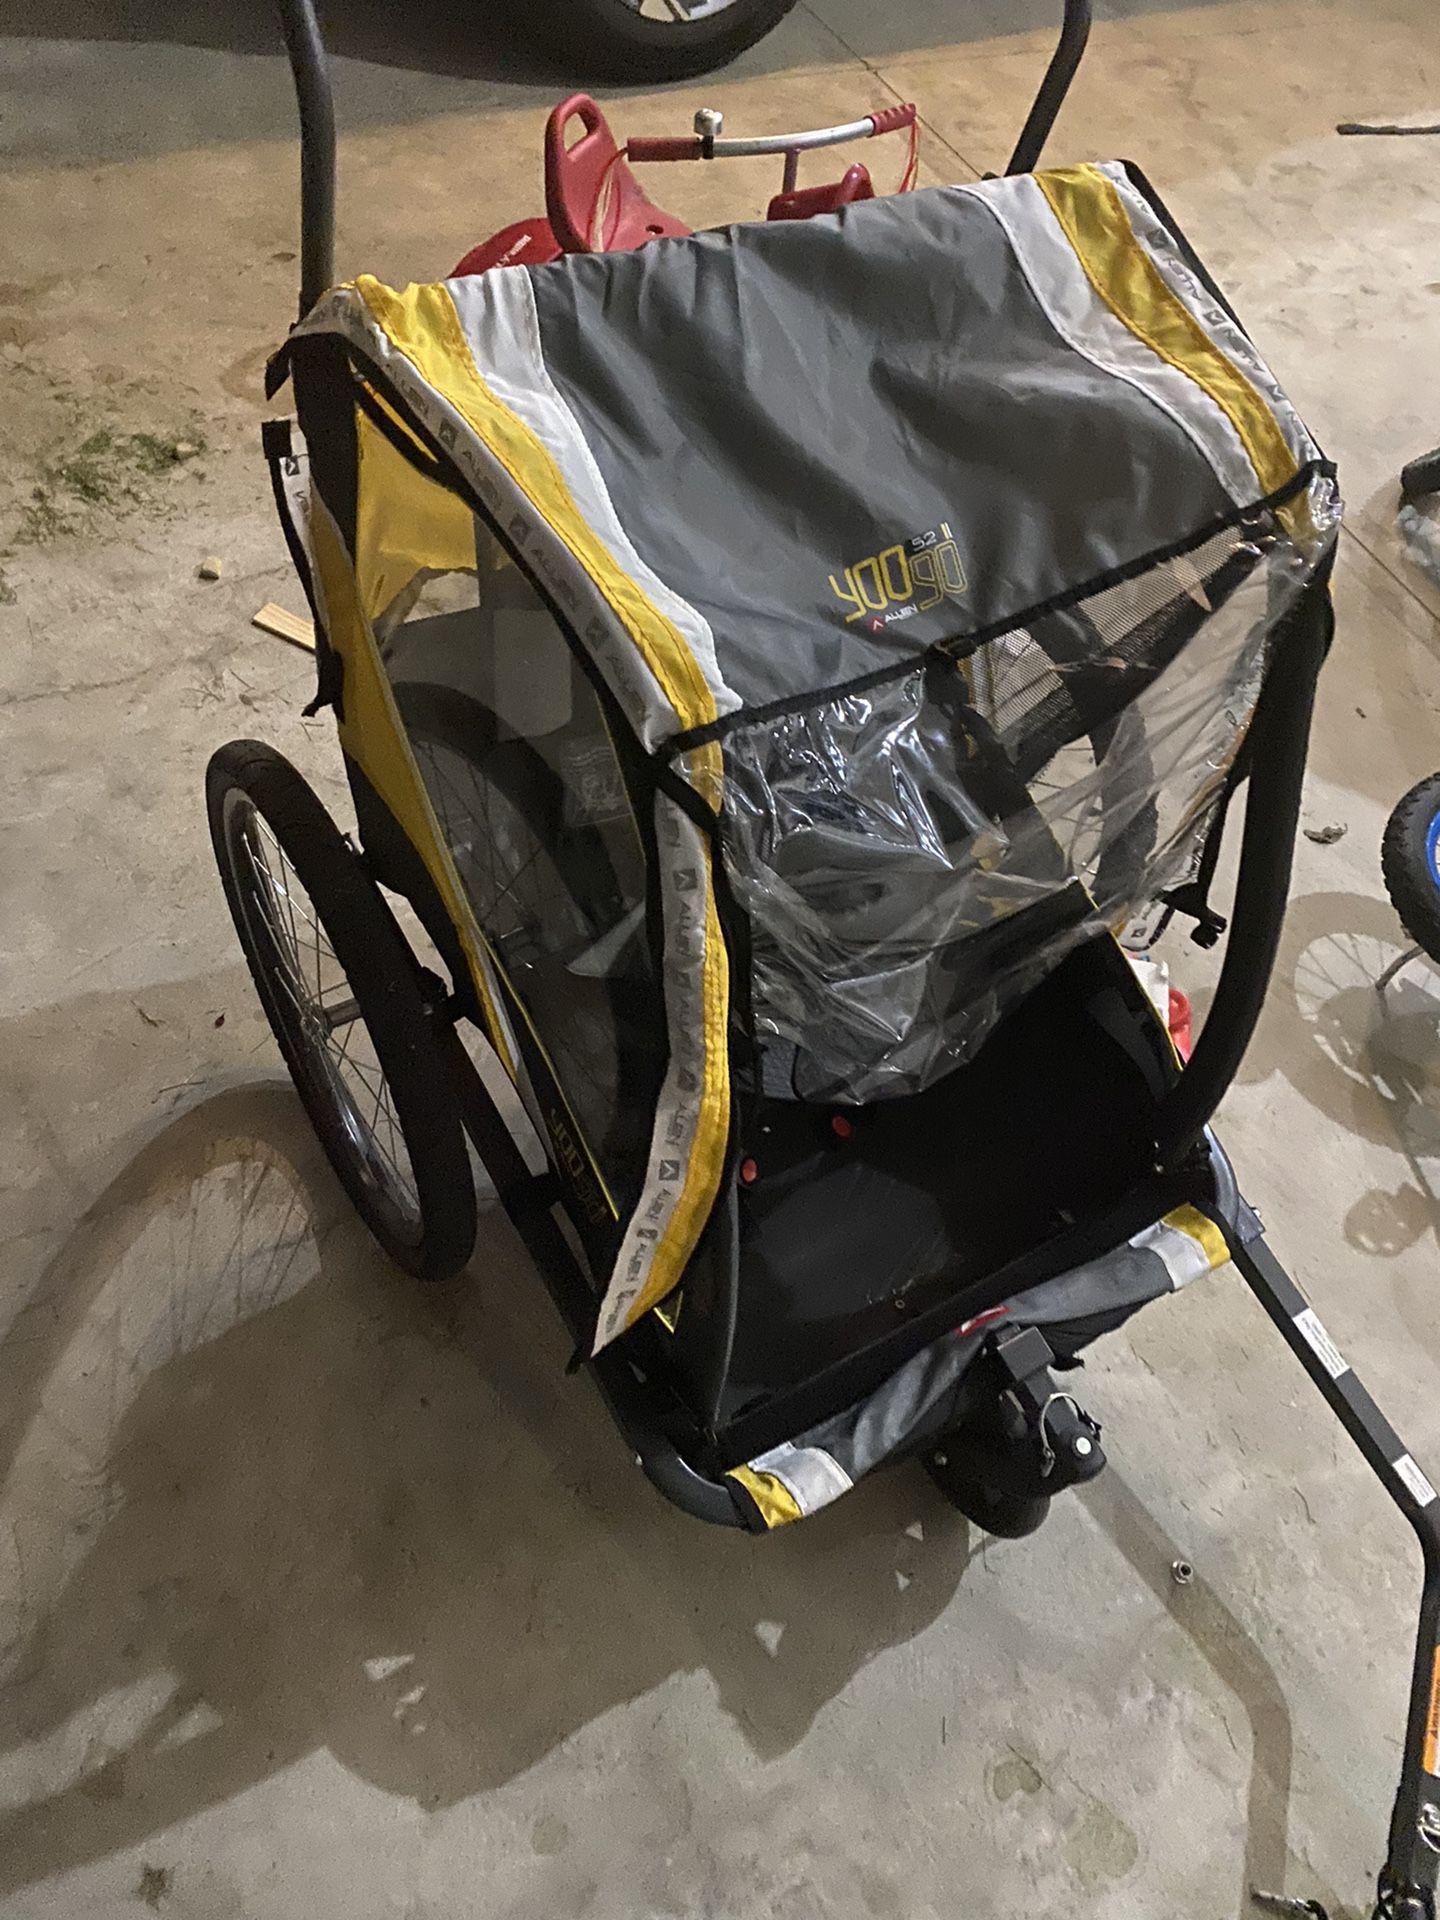 Bike Attachement Buggy And Stroller - Two Kids